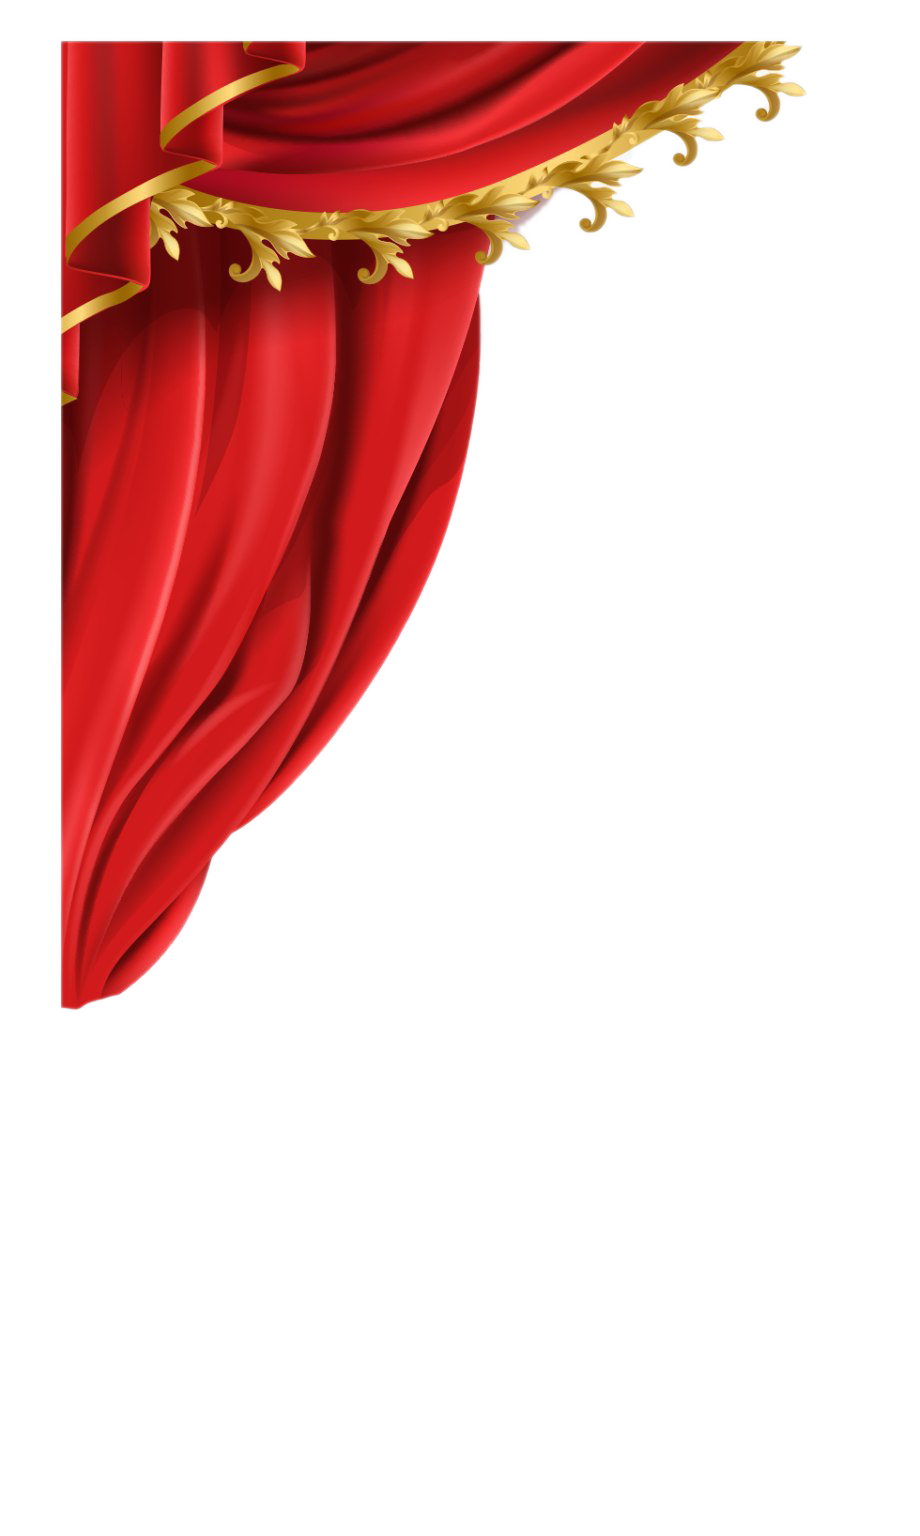 Red Curtain Transparent Image | PNG Play